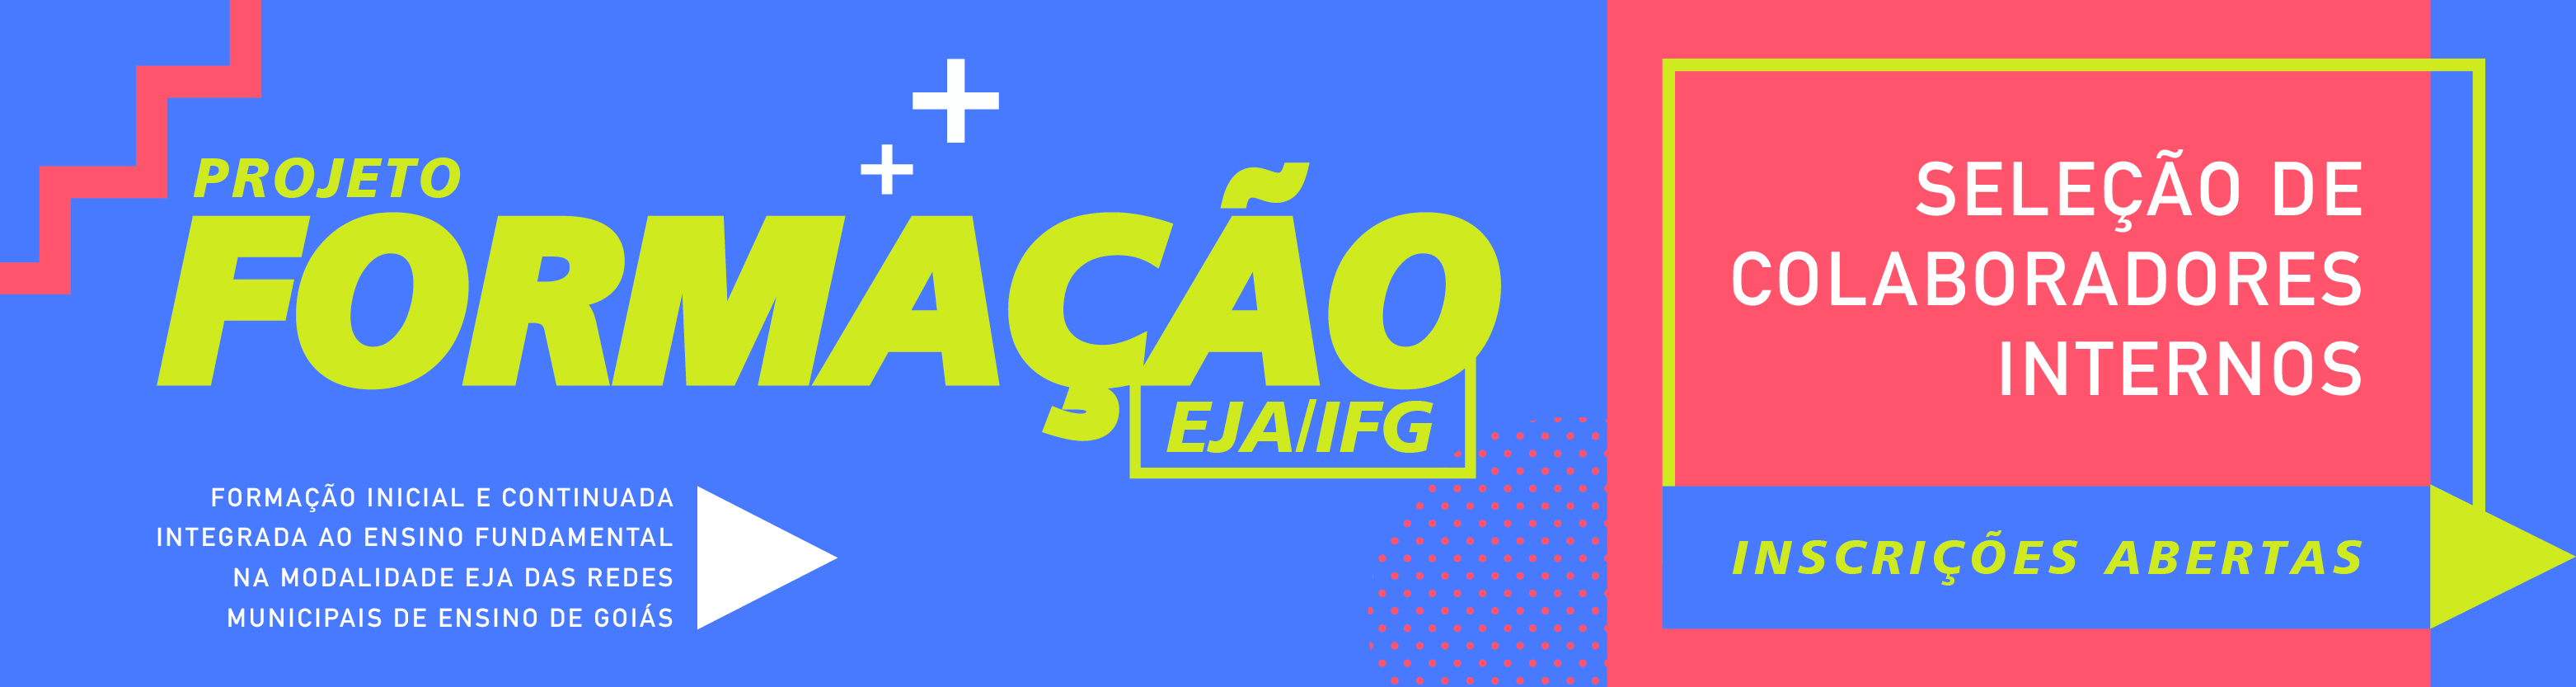 FORMACAO-Banner-Inscricoes.png - 120.07 kb